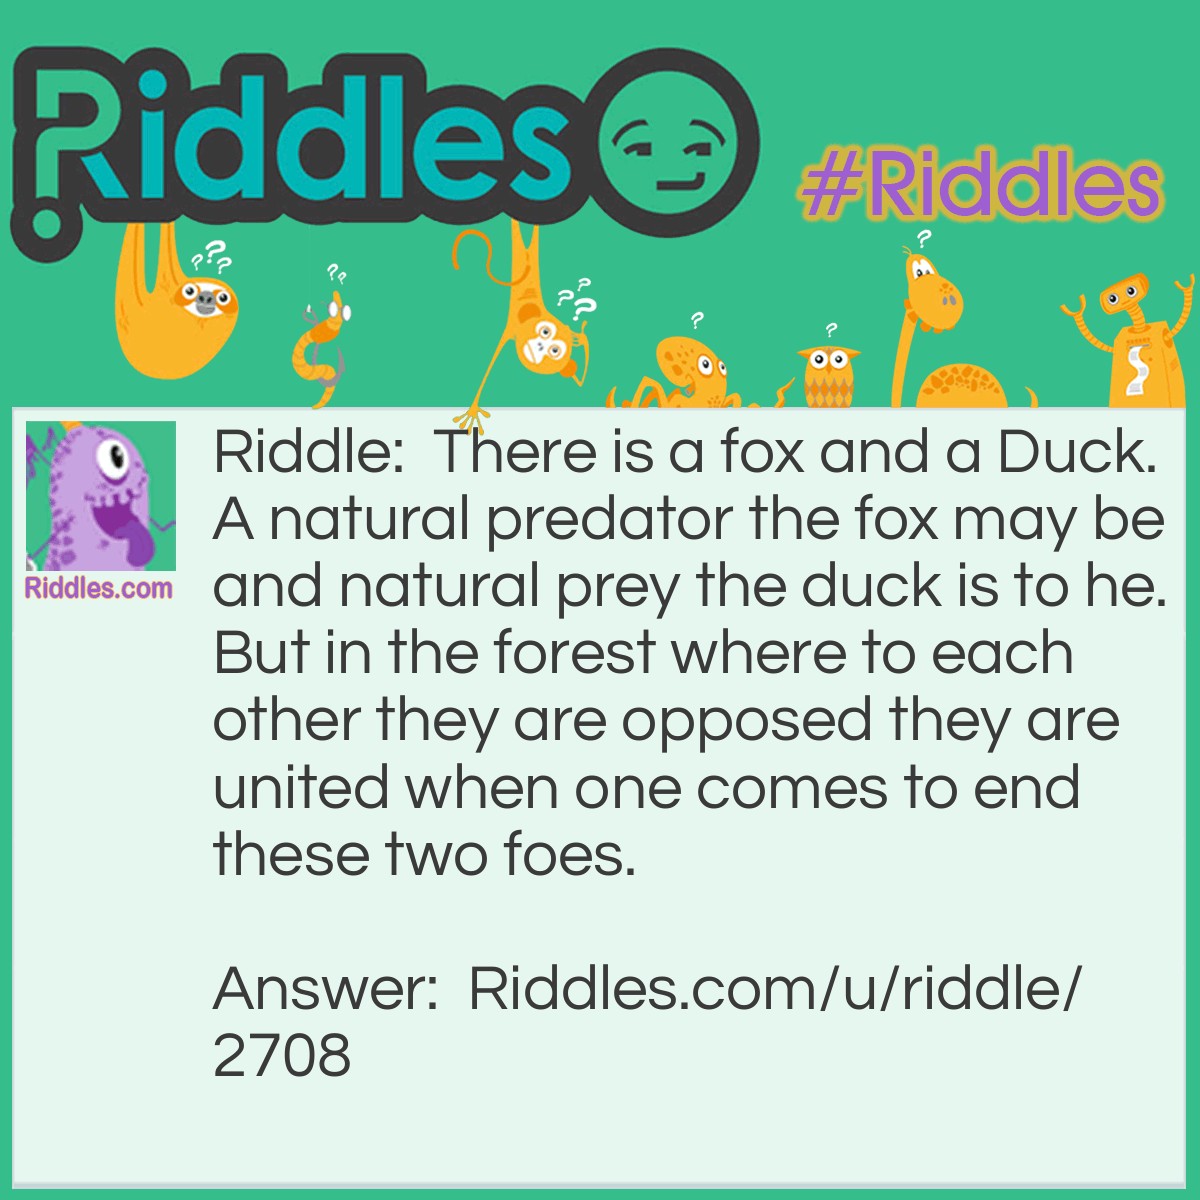 Riddle: There is a fox and a Duck. A natural predator the fox may be and natural prey the duck is to he. But in the forest where to each other they are opposed they are united when one comes to end these two foes. Answer: Those who seek the answer, in the title you shall find the solution to the conflict that this riddle has placed in your mind.